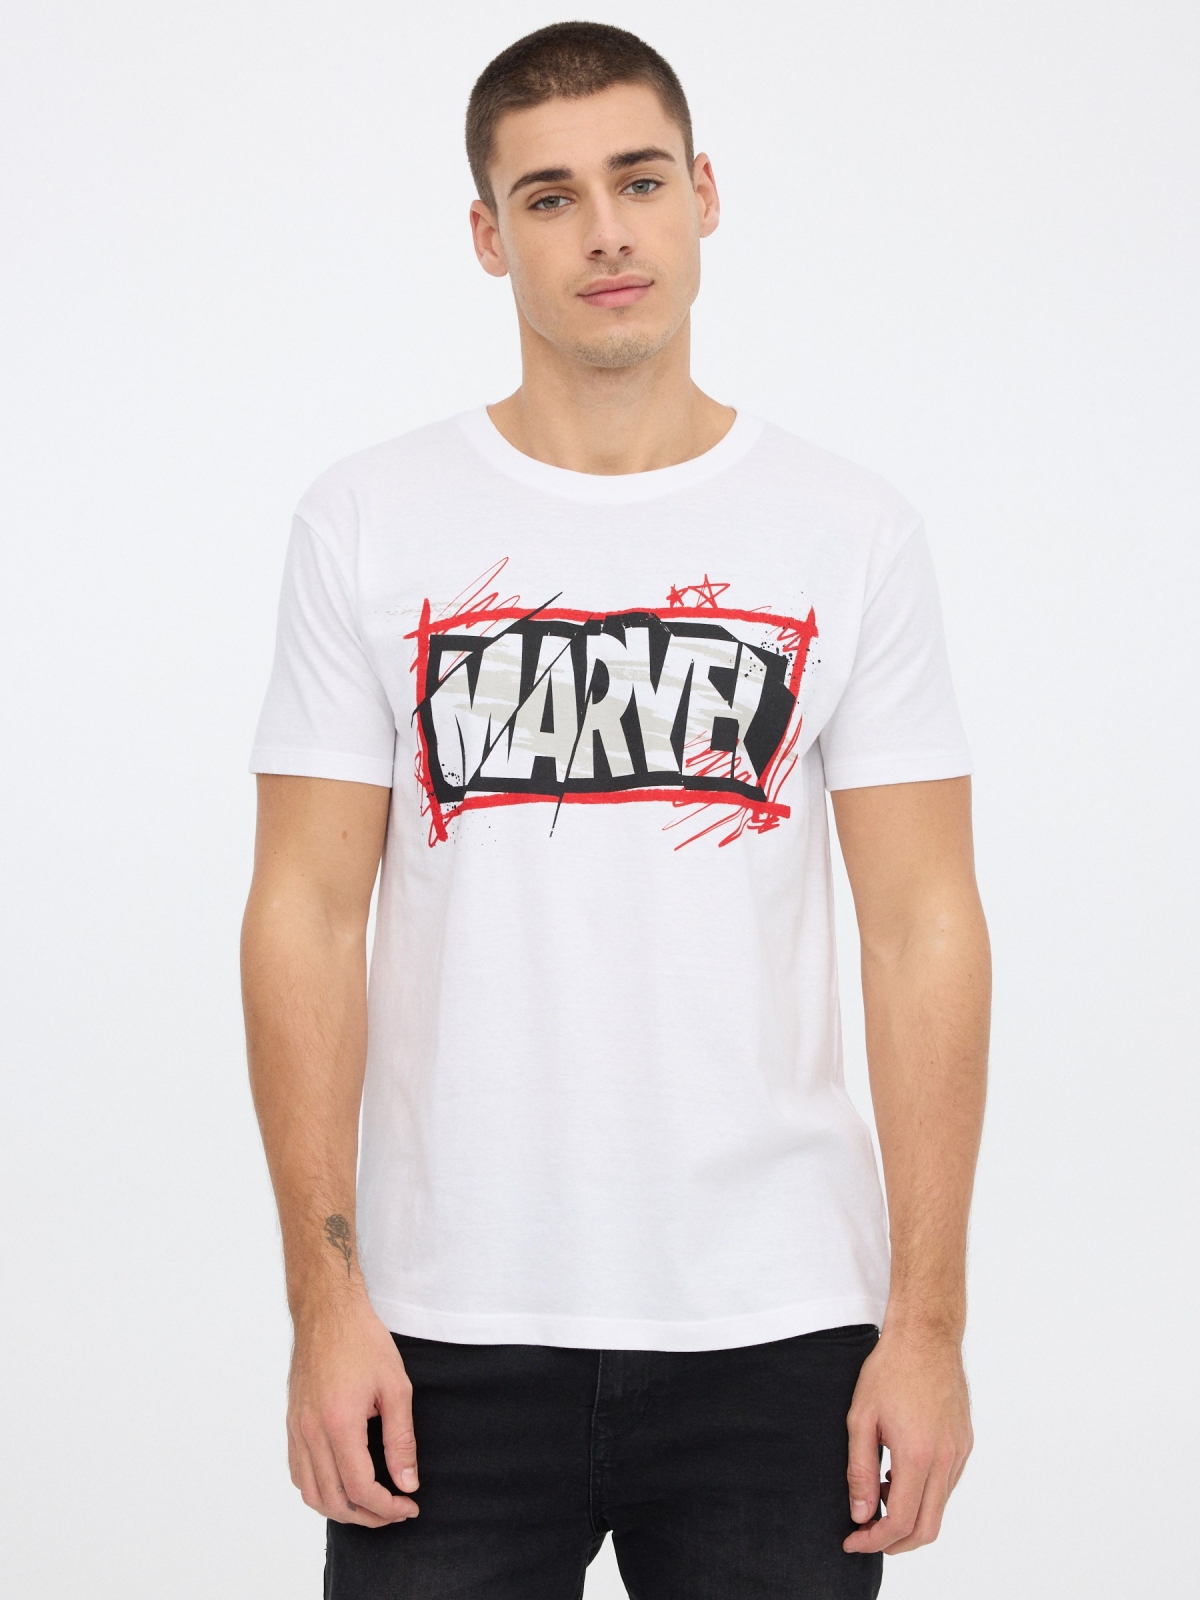 Marvel t-shirt white middle front view